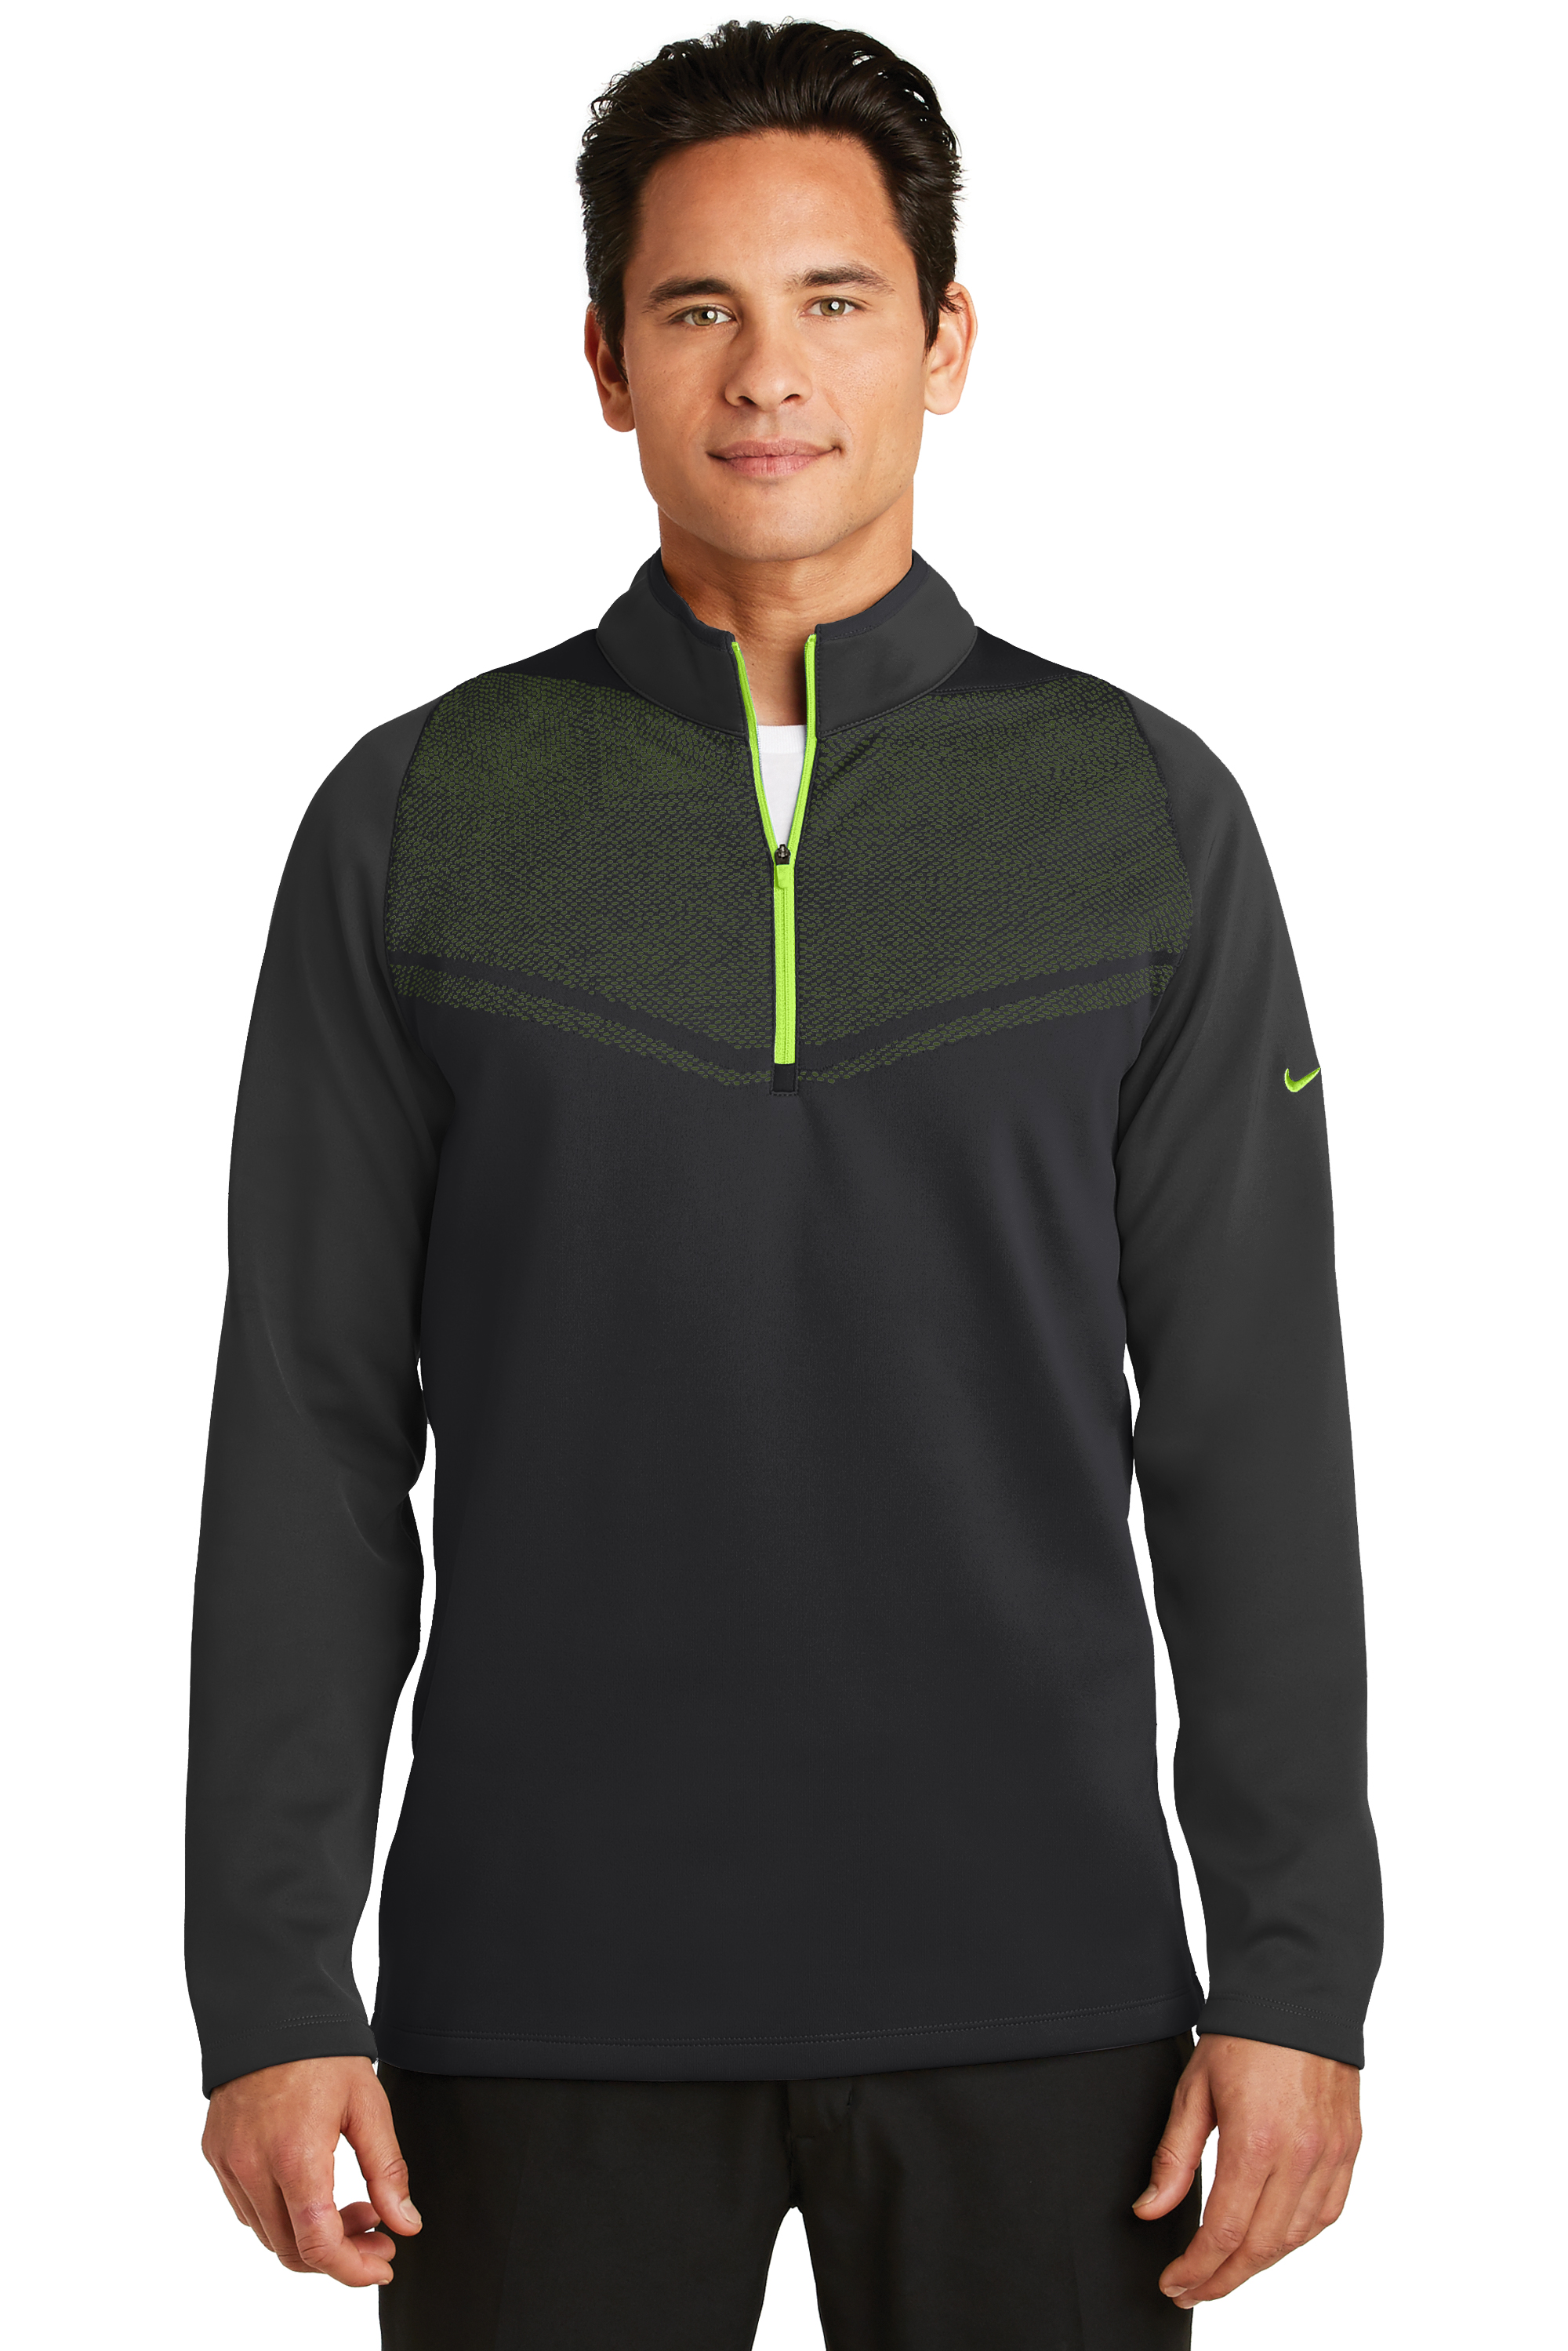 nike therma fit golf jacket